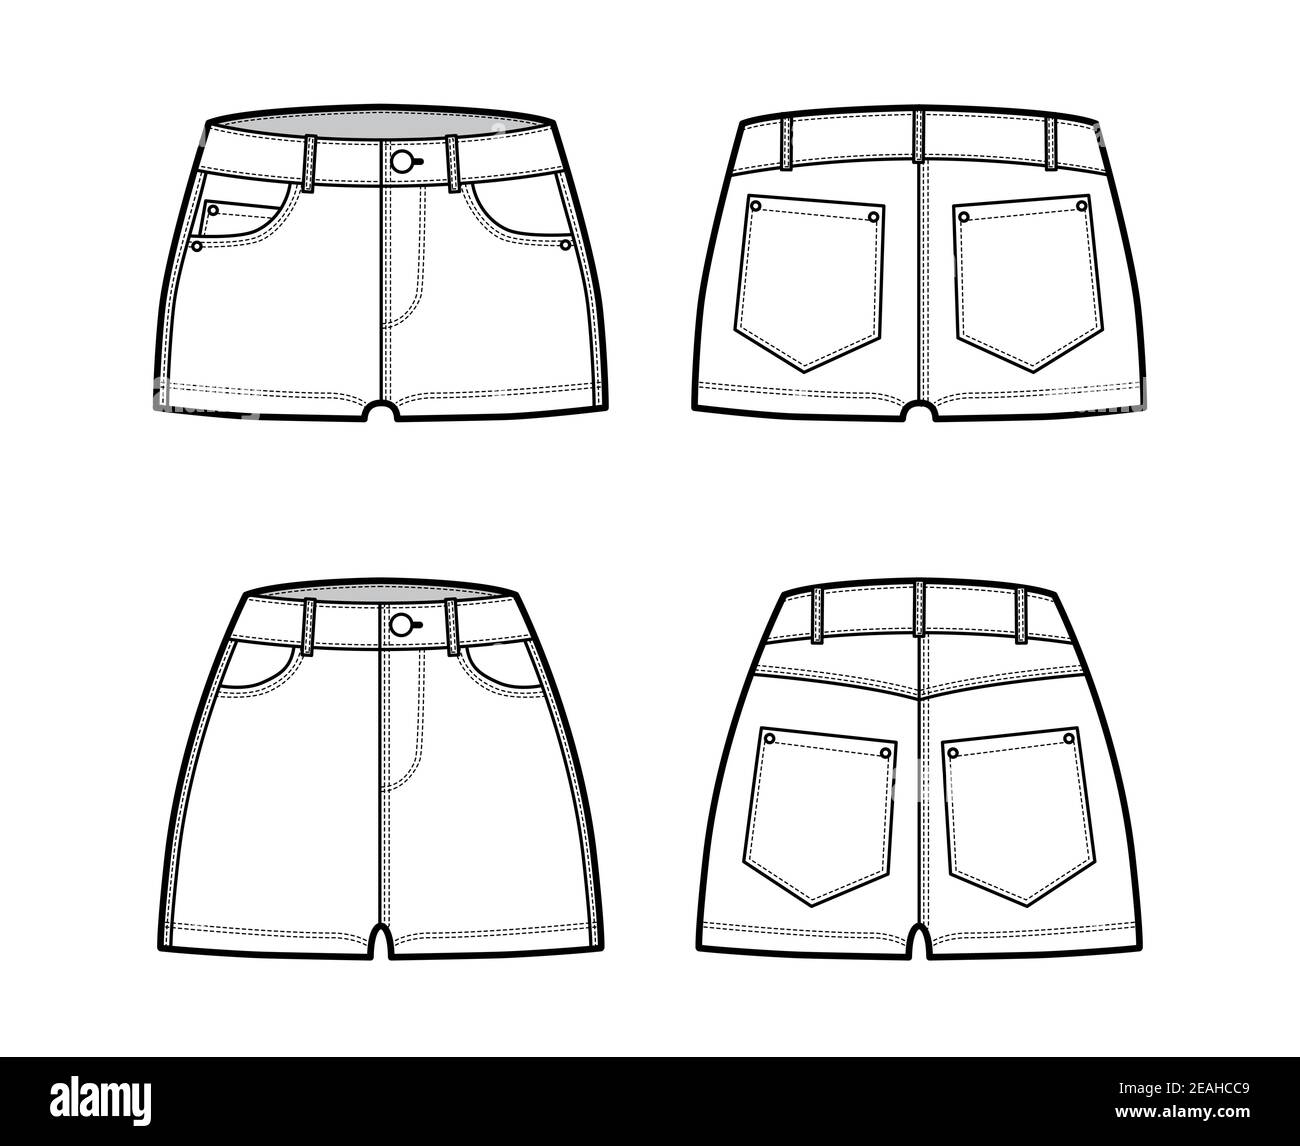 set of denim hot shorts pants technical fashion illustration with micro mini length normal low waist high low rise coin 5 pockets flat bottom template front back white color women men cad mockup 2EAHCC9